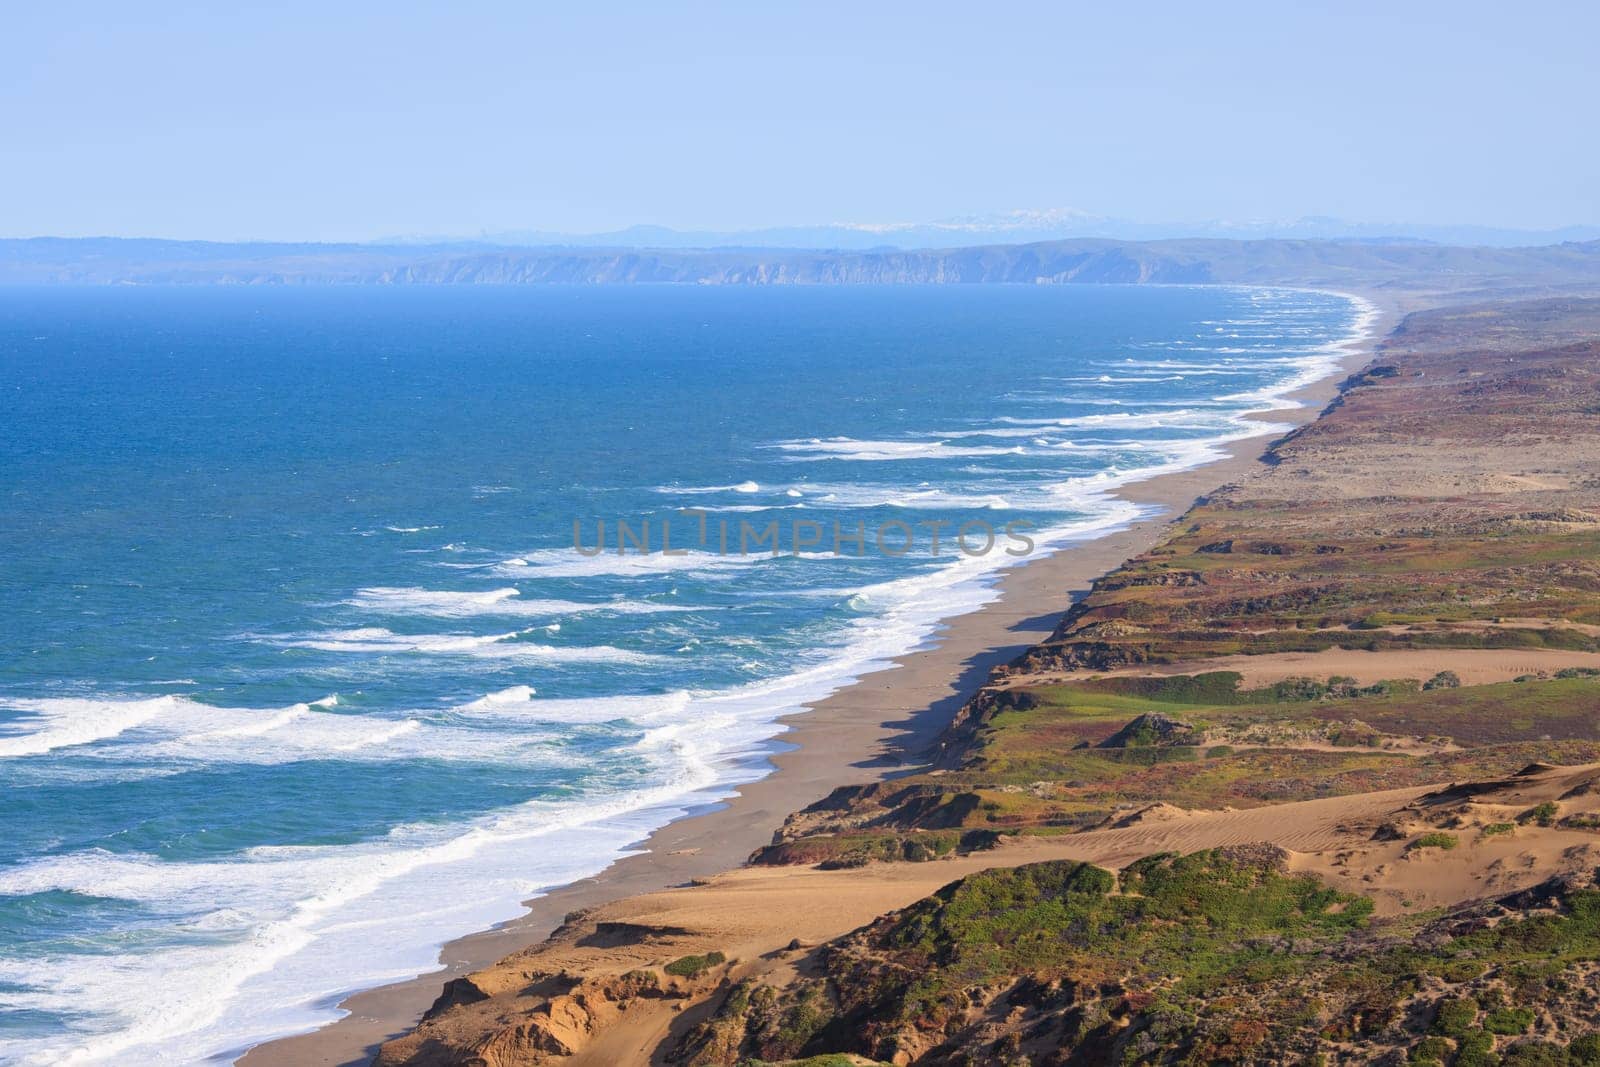 View of long sandy beach and cliffs of Point Reyes on Northern California coast by Osaze